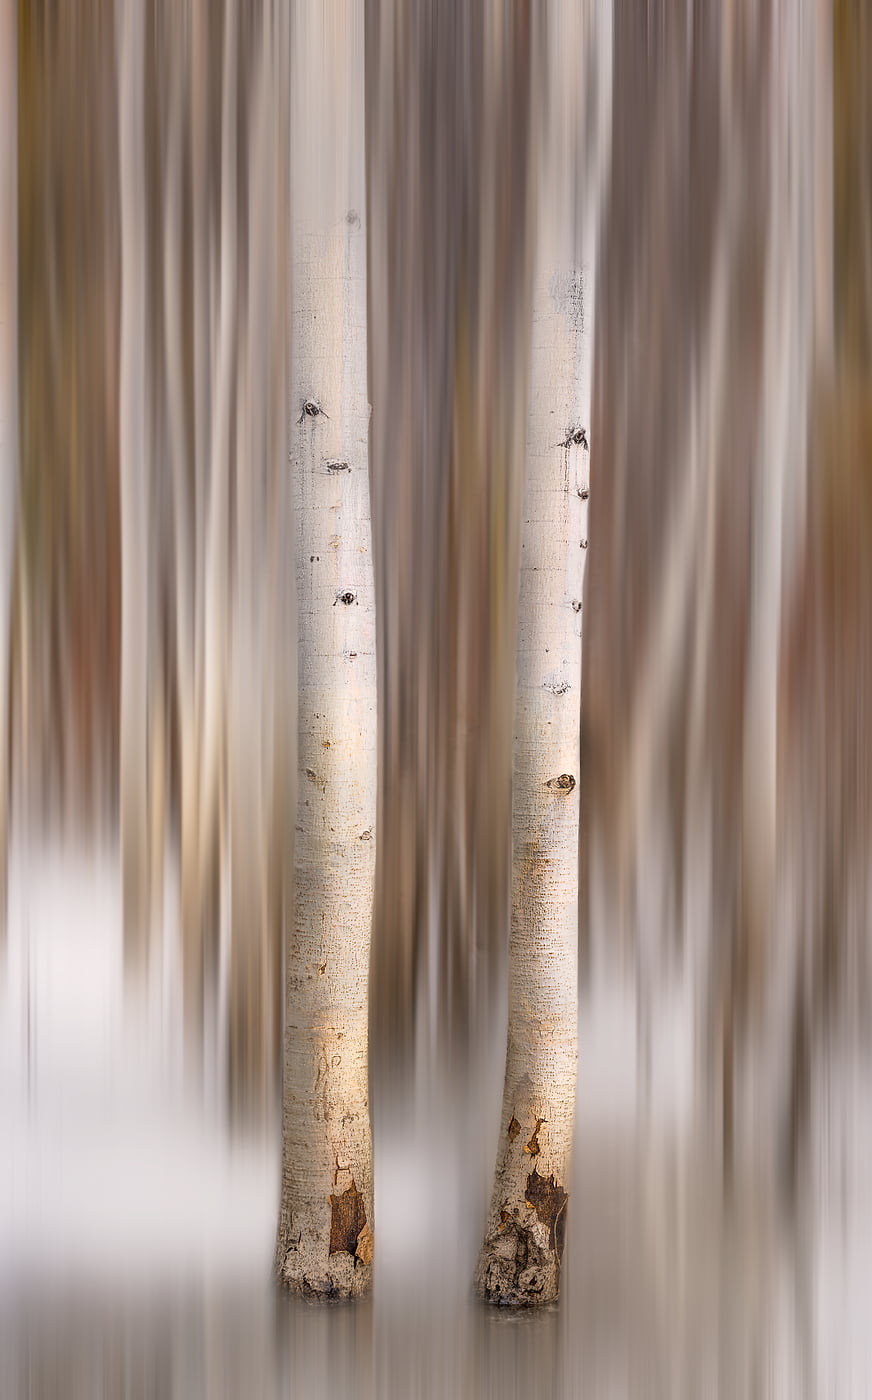 334 megapixels! A very high resolution, abstract artwork of aspen trees; created by Francesco Emanuele Carucci.